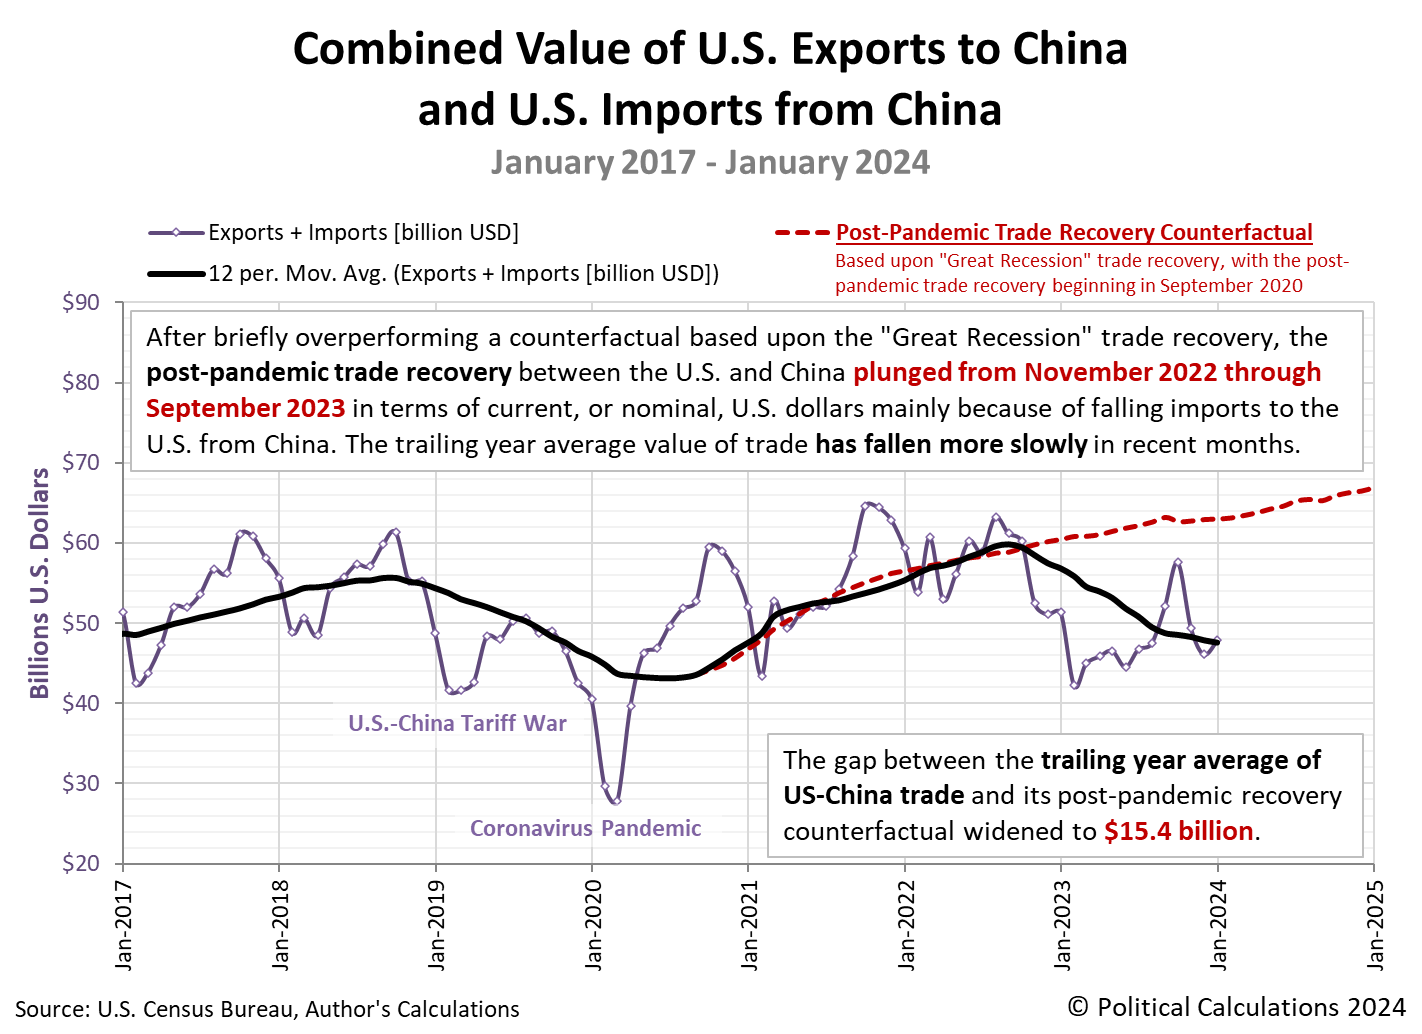 Combined Value of U.S. Exports to China and U.S. Imports from China, January 2017 - Januar 2024